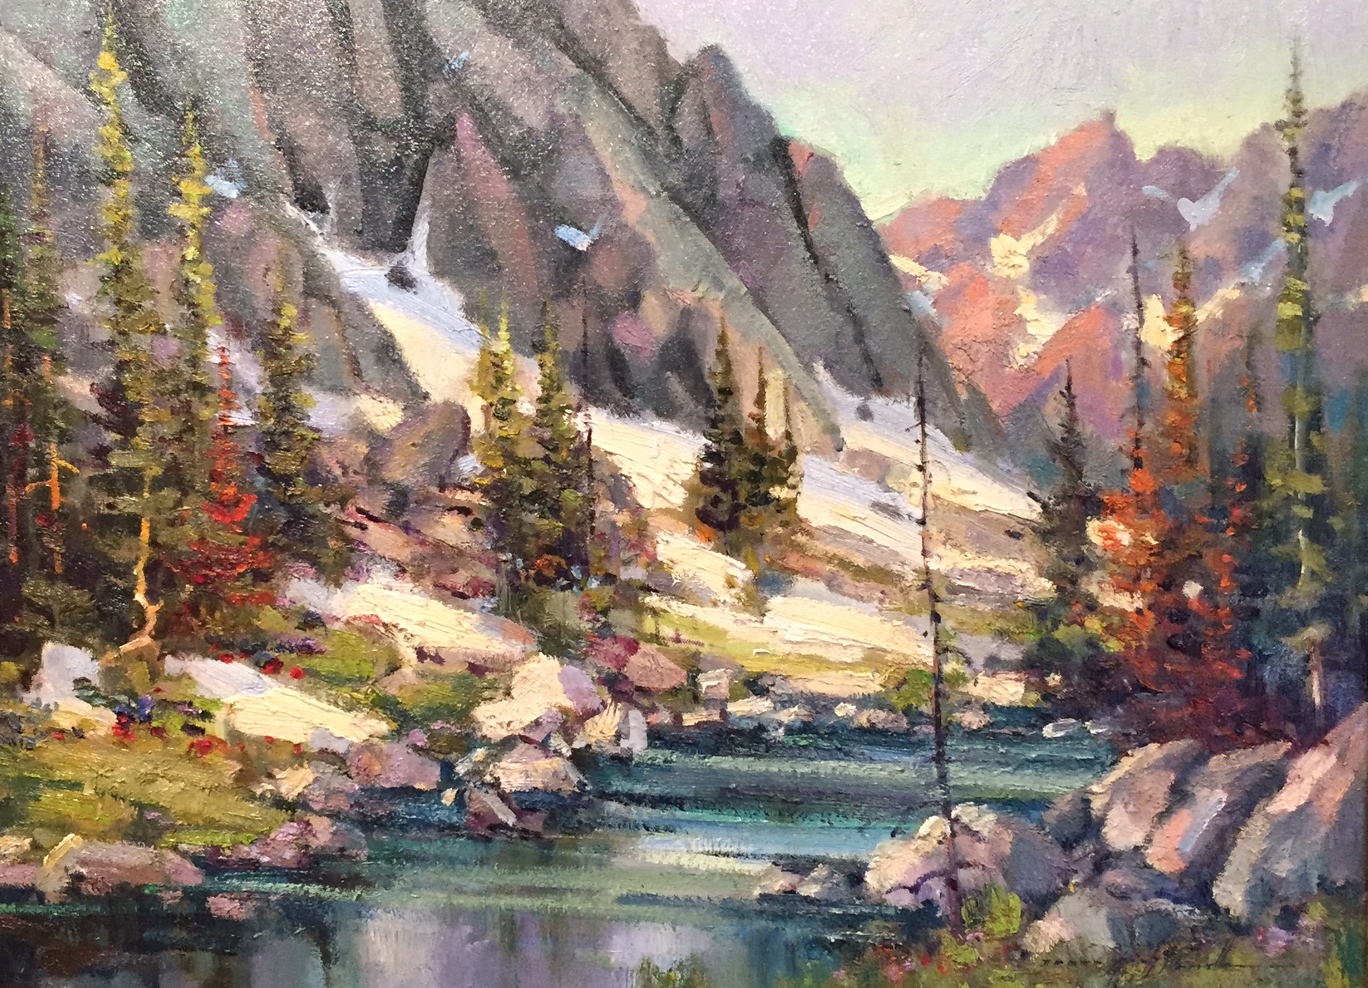 Snow Patches by  Kirk Randle - Masterpiece Online